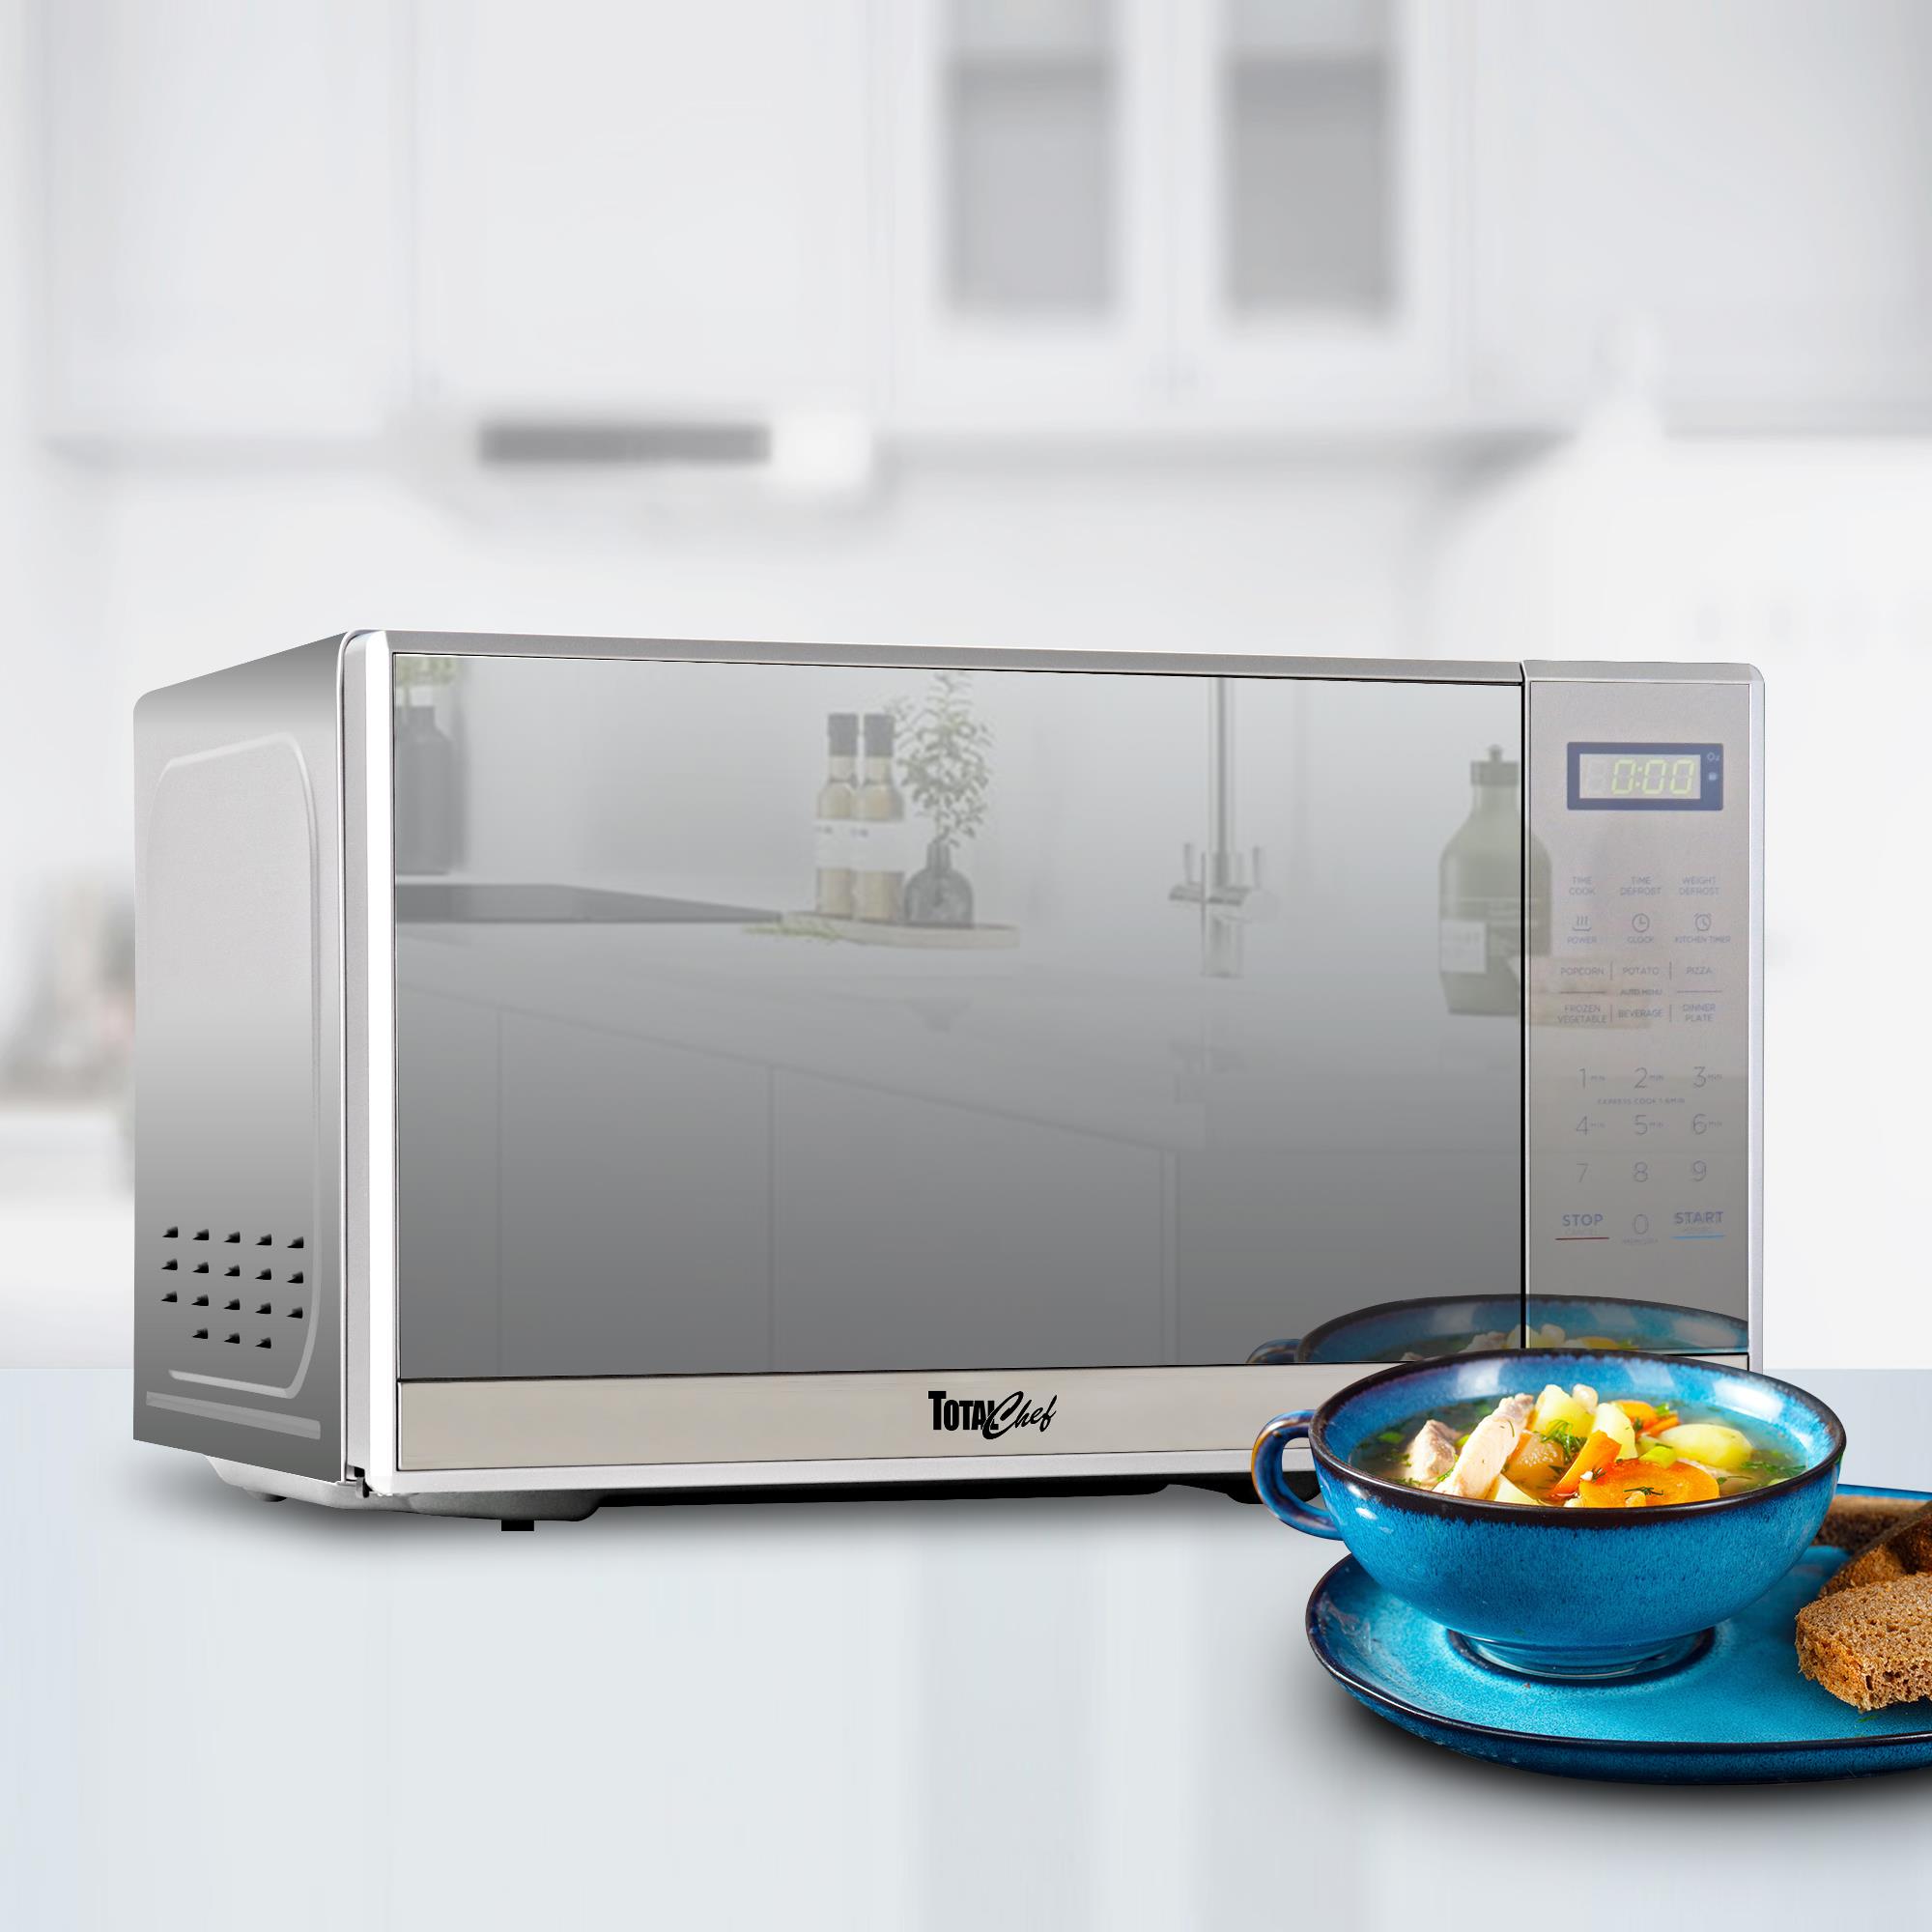 Muave' small microwave oven 0.7 cu. ft, stainless steel, 120v cUL